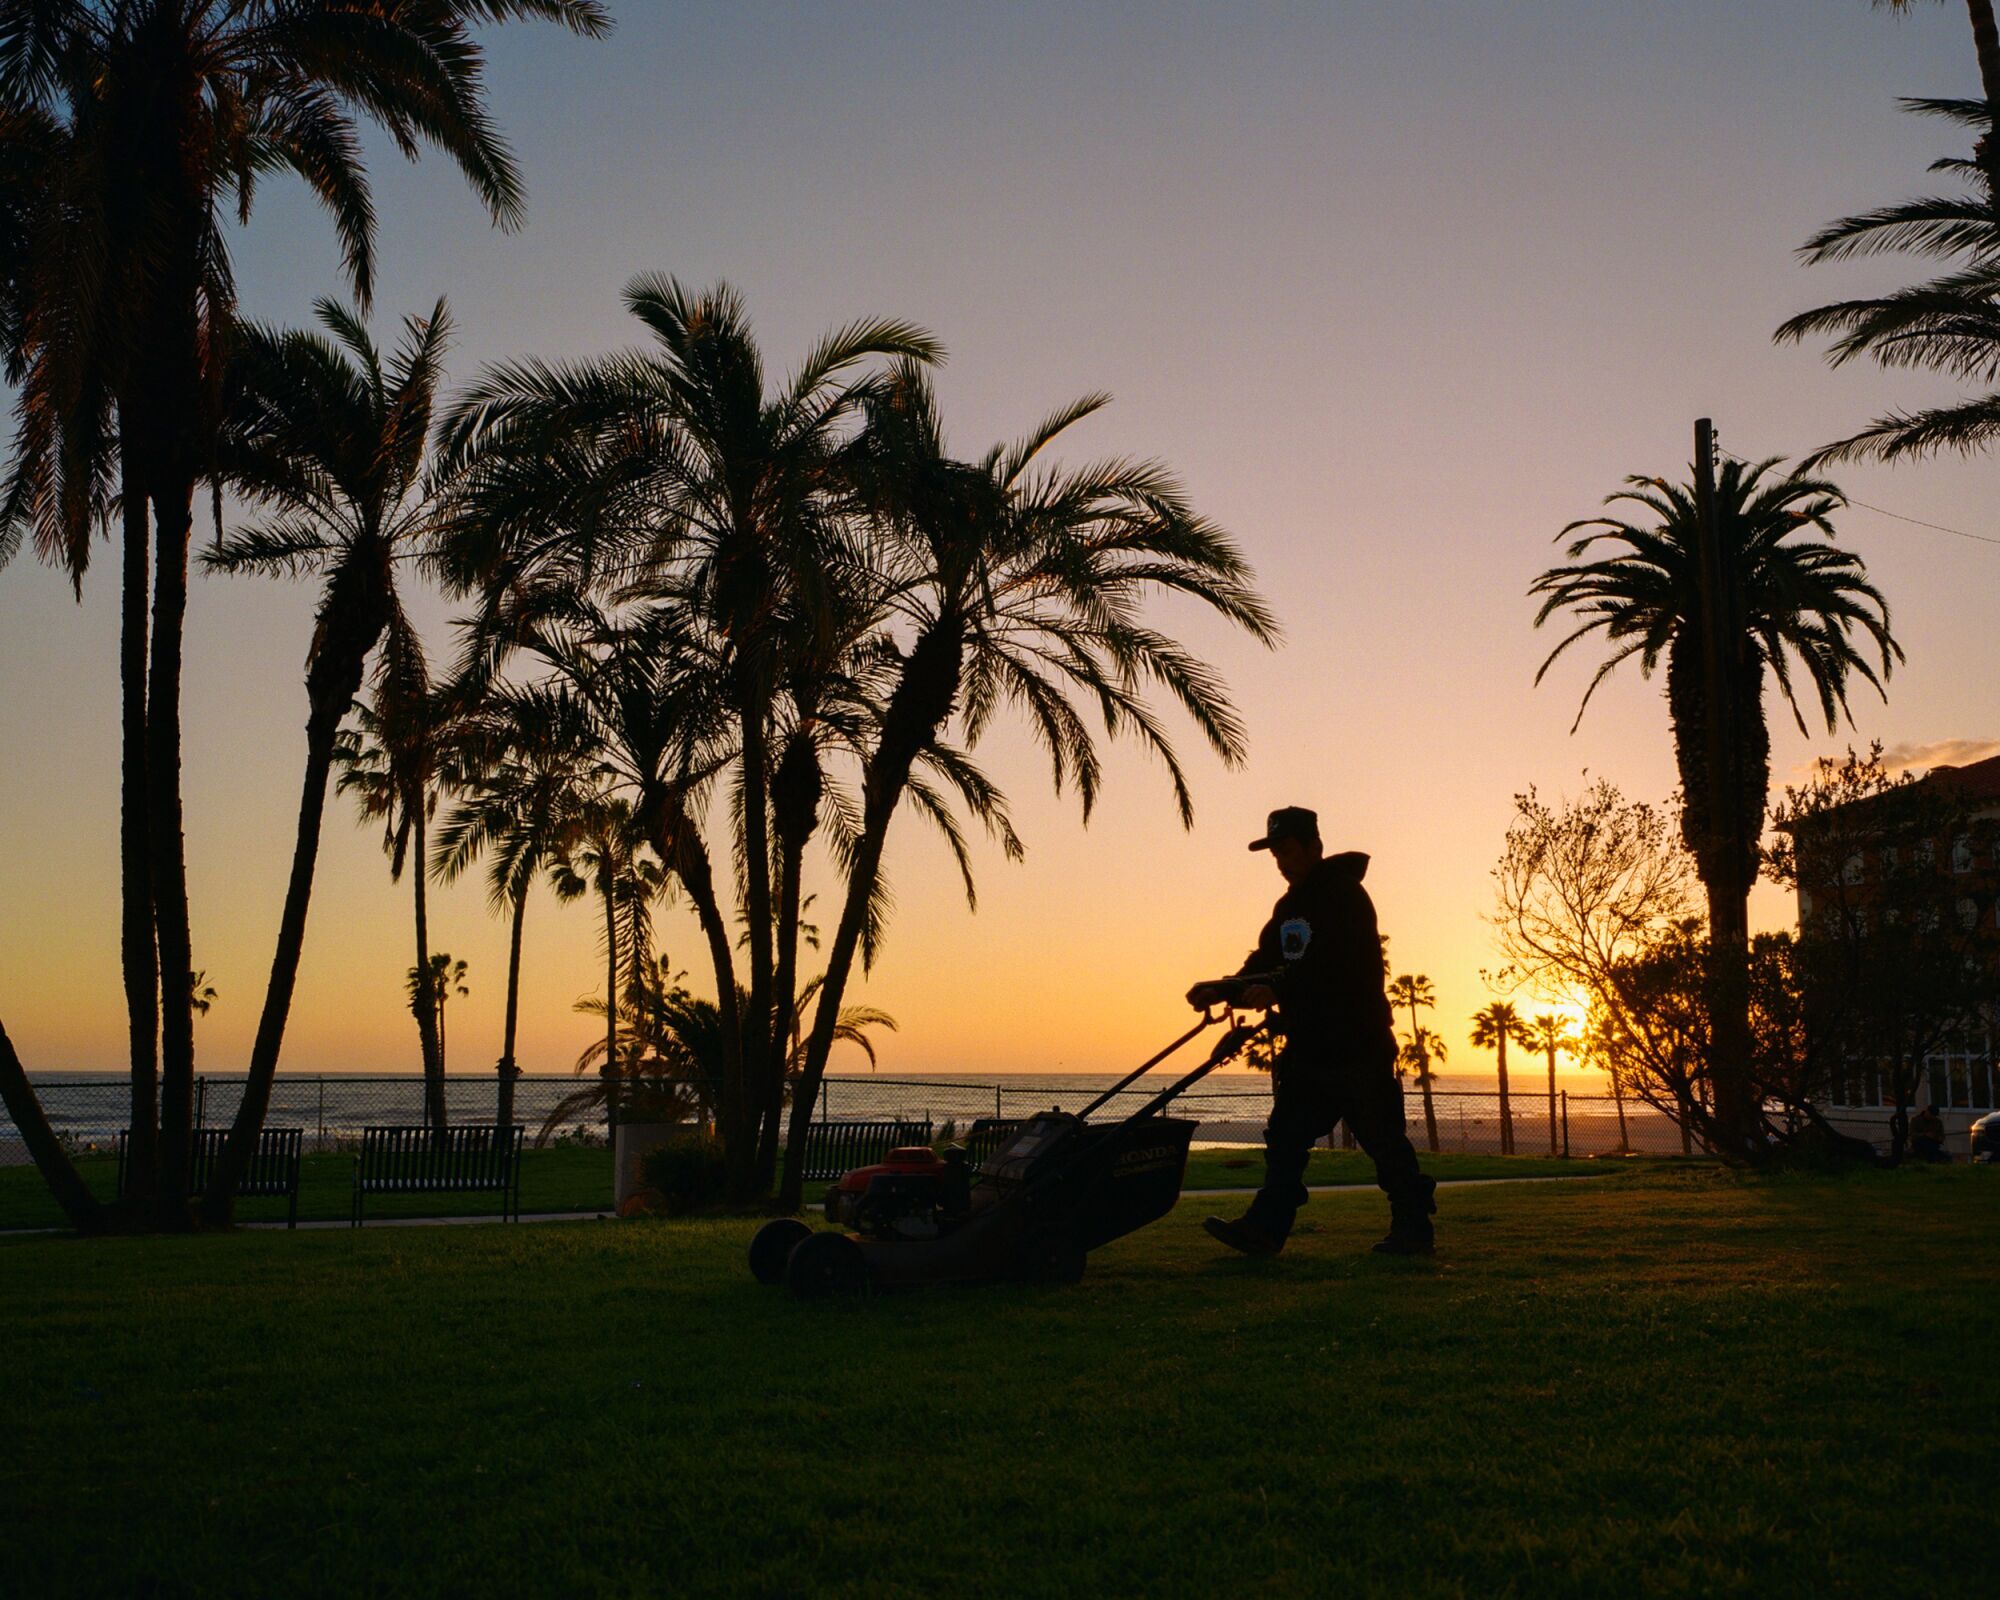 Landscaper cuts grass in front of sunset.